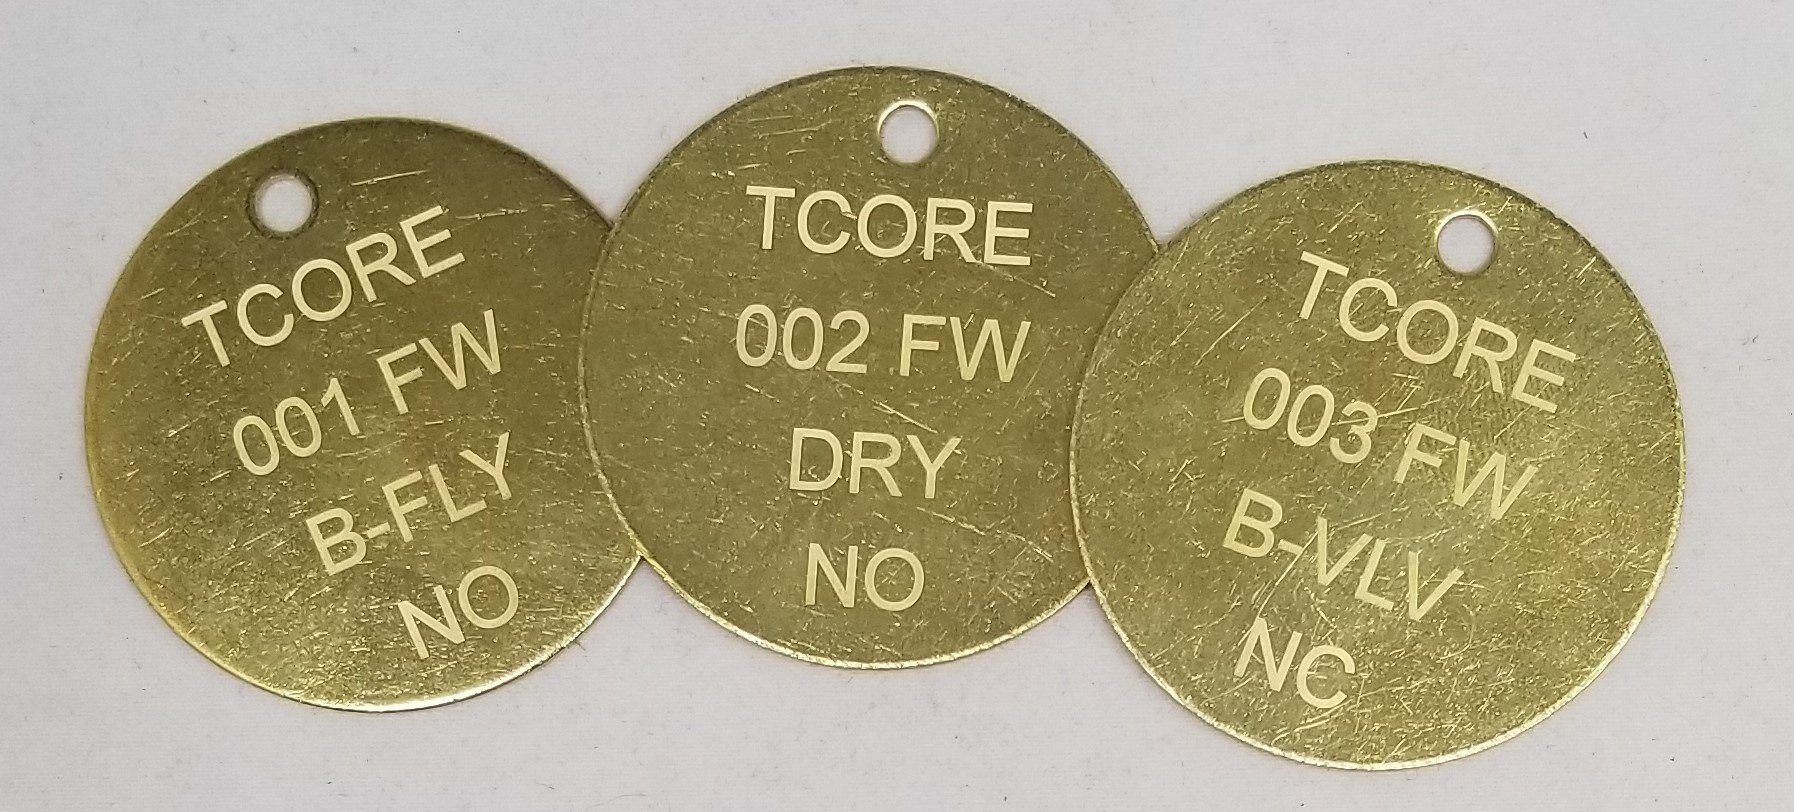 Brass Identification/Equipment Tags, Laser Marked 1 1/2" Metal Tags Craftworks NW 